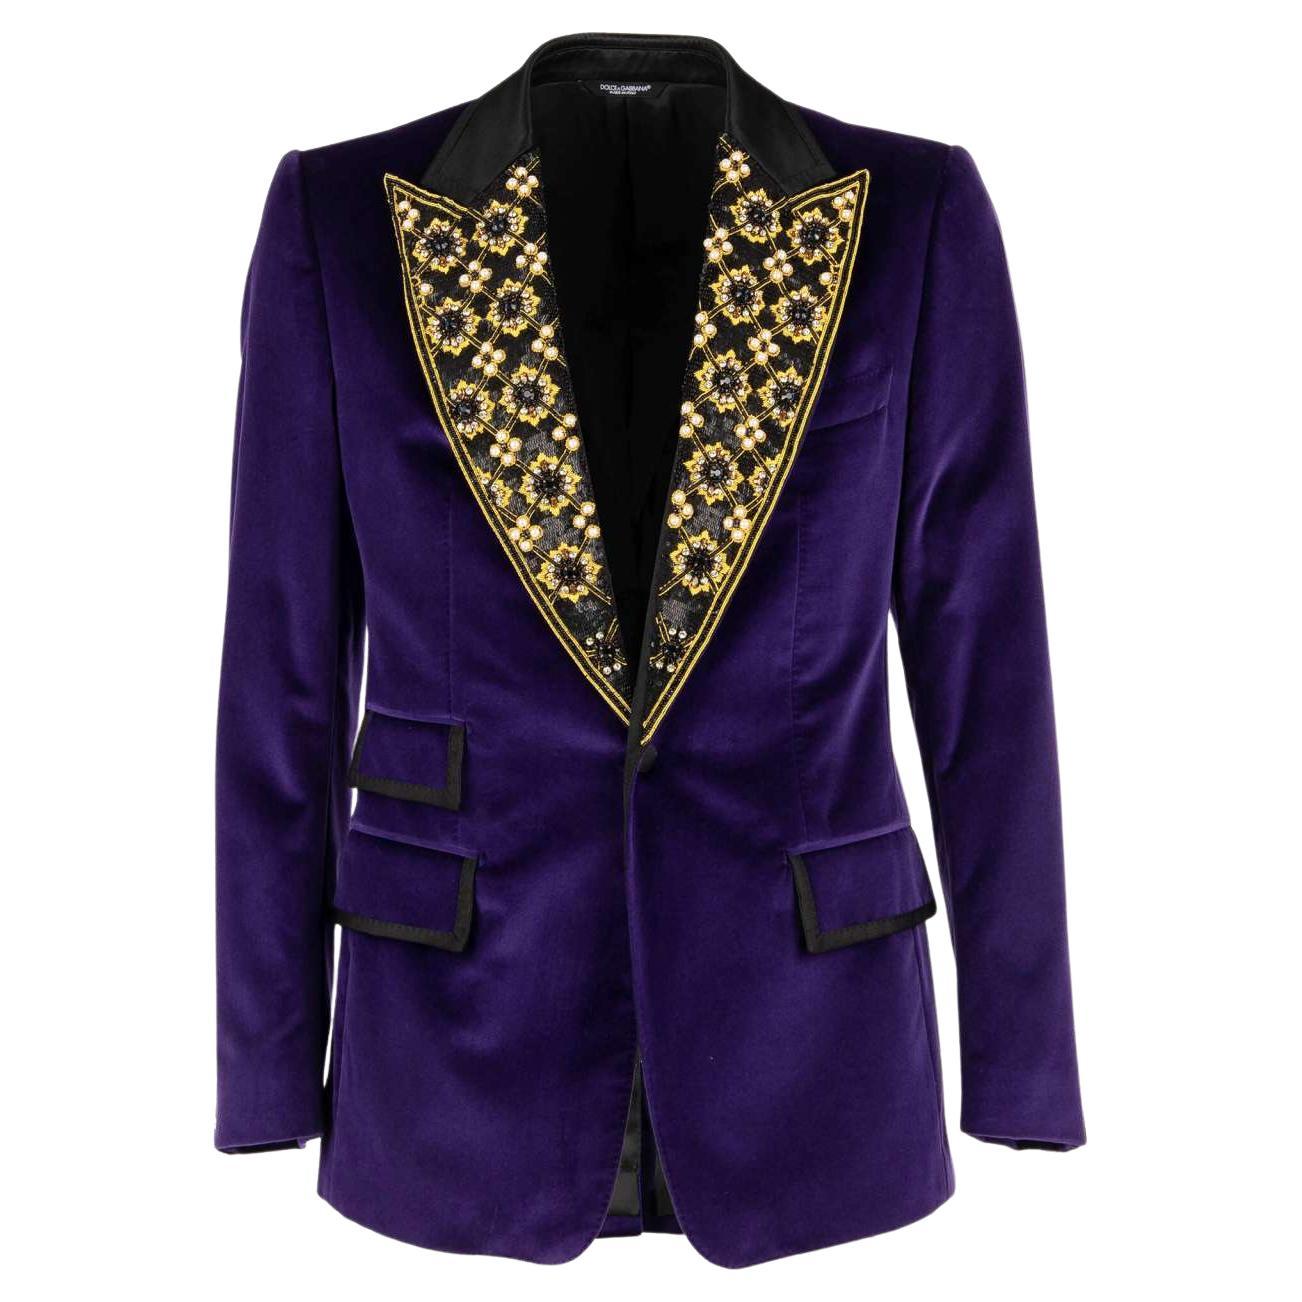 D&G Velvet Tuxedo Blazer with Crystals, Pearls and Sequins Purple Black 46 For Sale